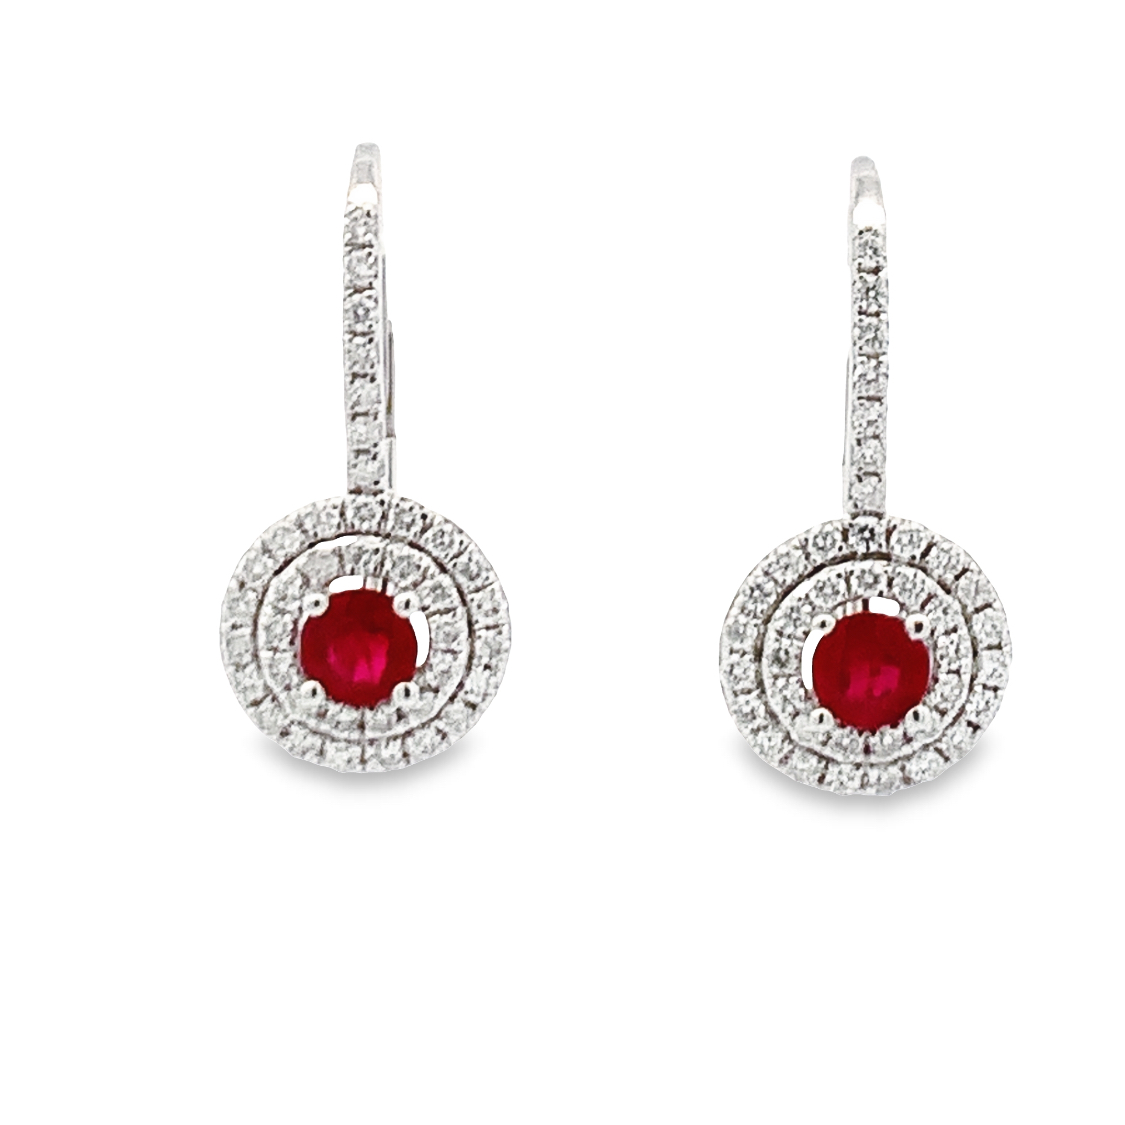 14K White Gold Leverback Earrings Round Rubies